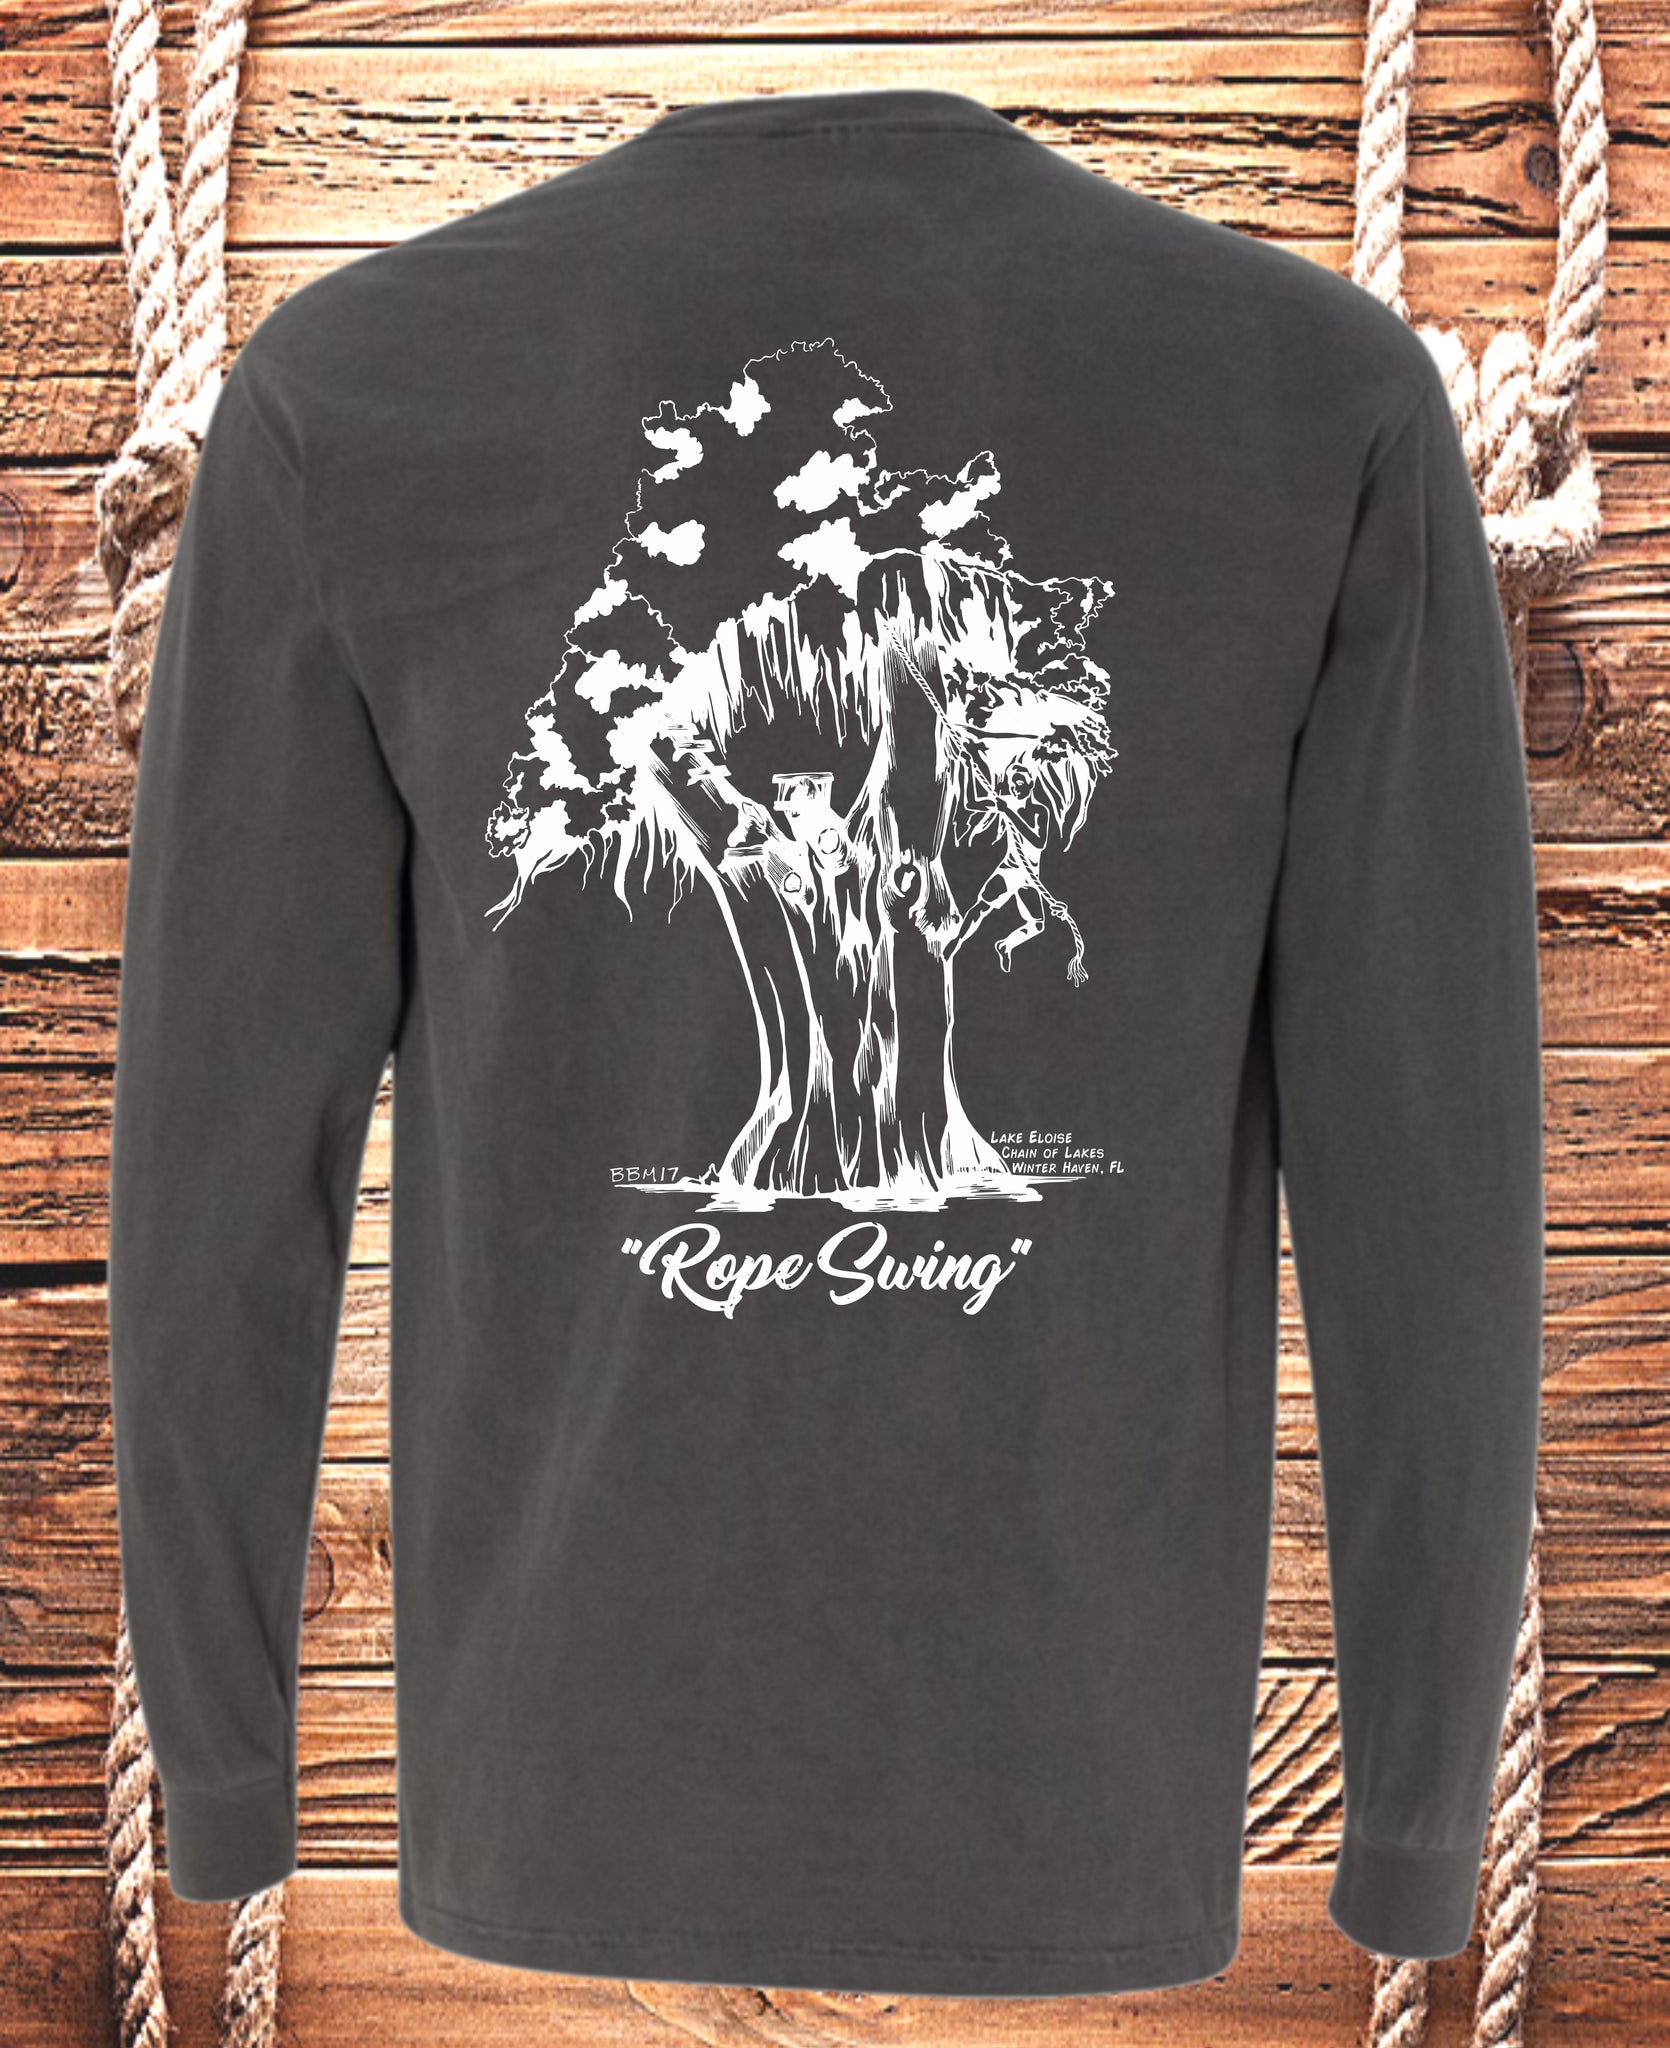 Rope Swing on Lake Eloise T-shirt, Long Sleeve, Hand Drawn by Local Brooke-Braddy Moore available in 6 colors